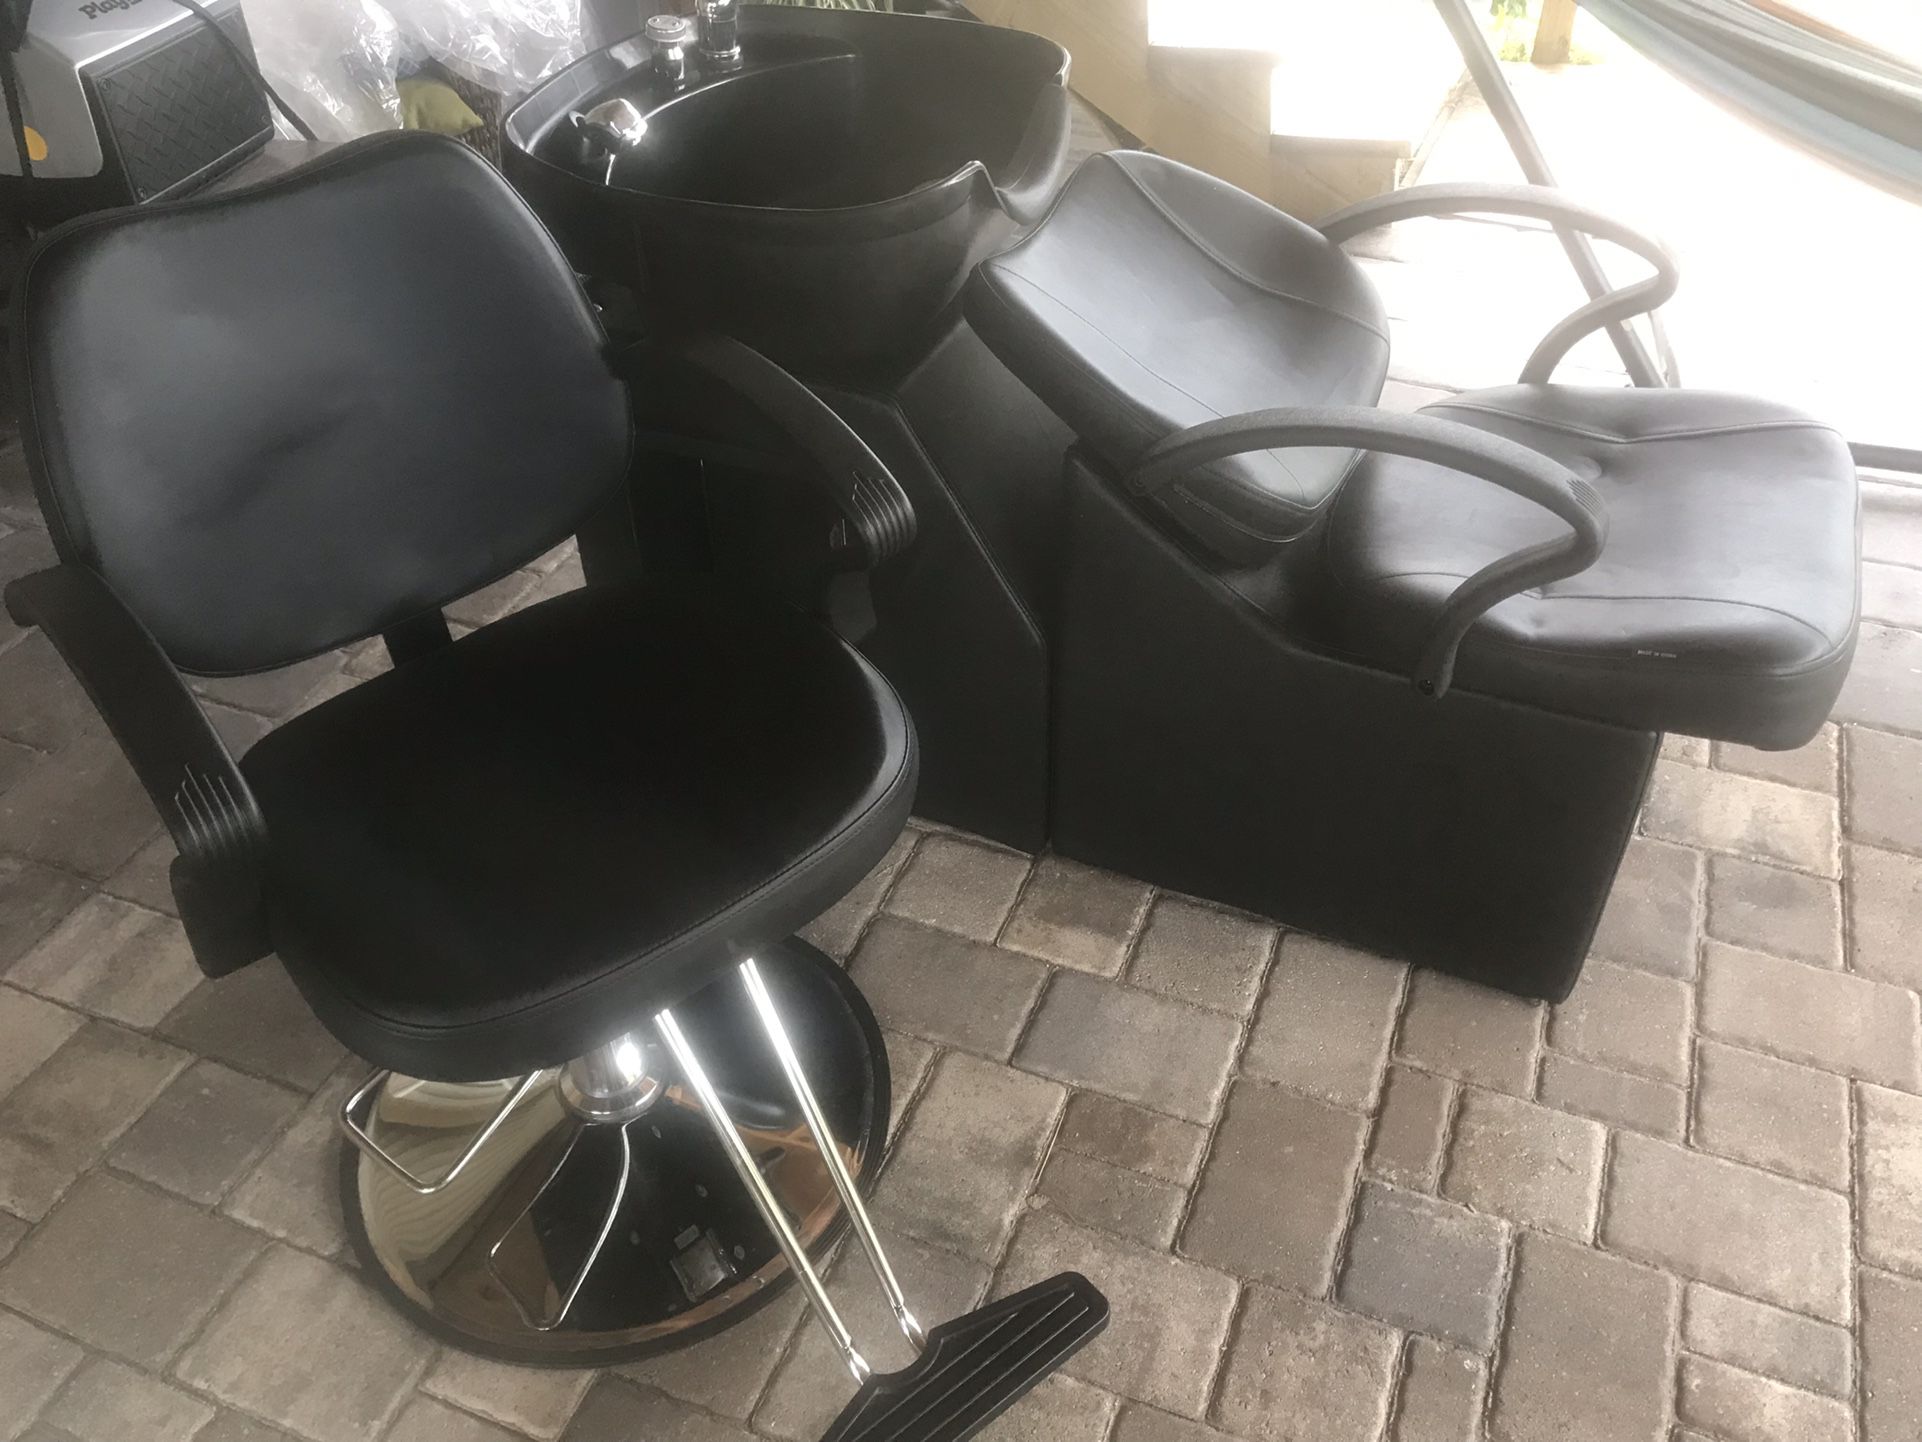 Hairstylist Chair And Shampoo Bowl 